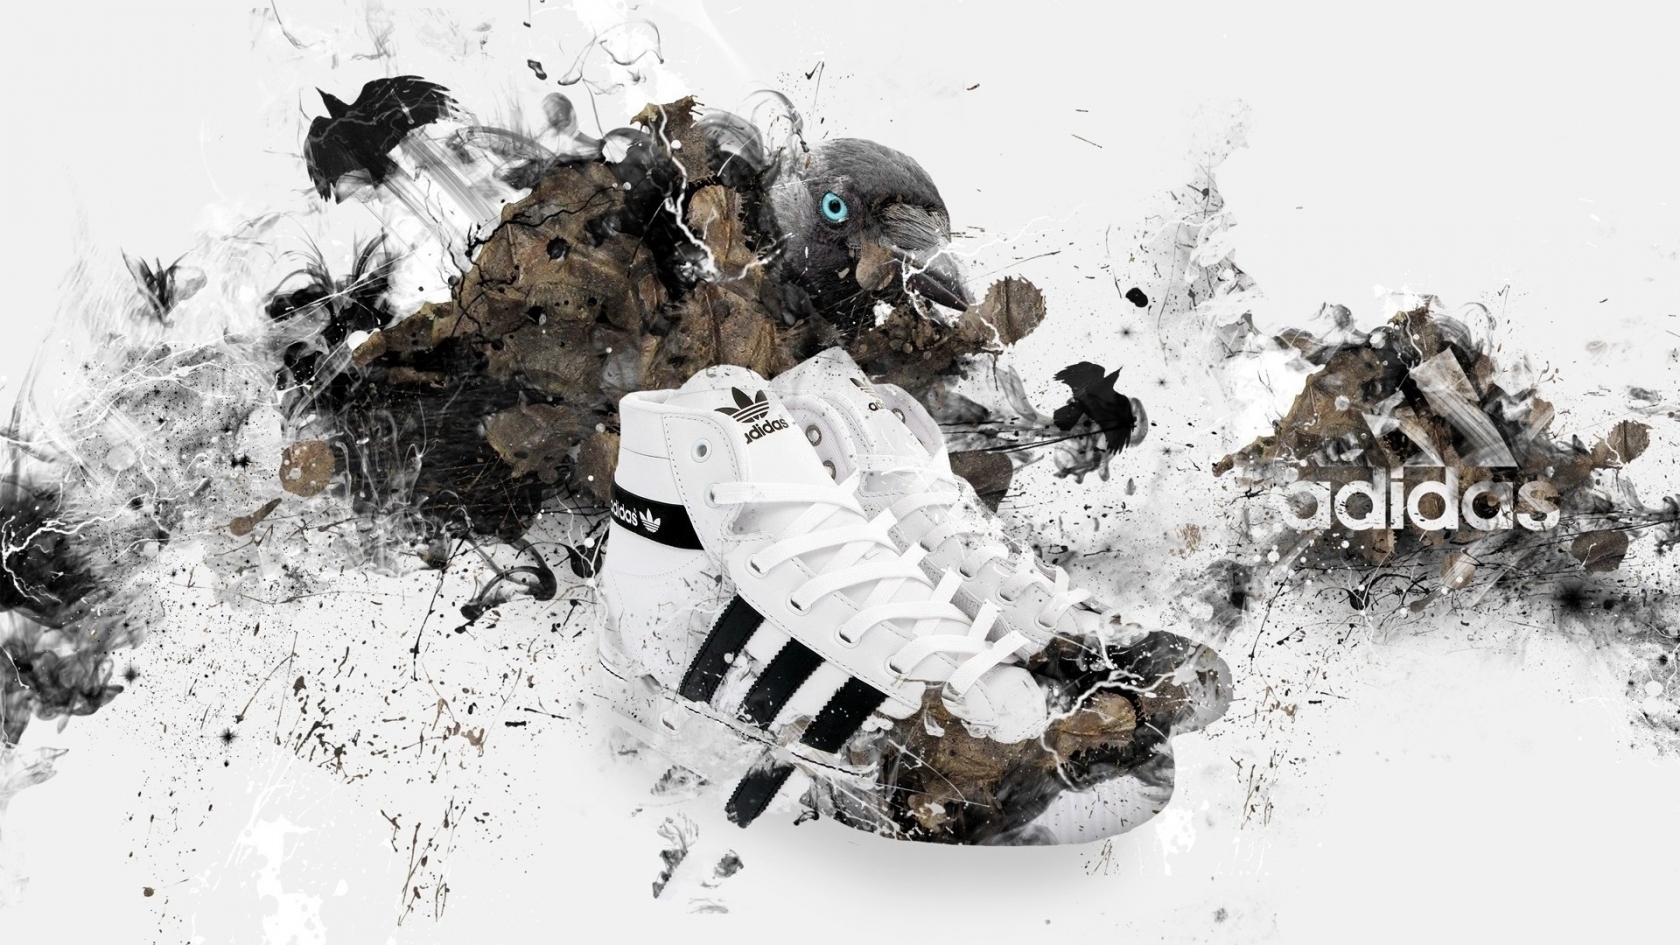 Adidas Shoes for 1680 x 945 HDTV resolution